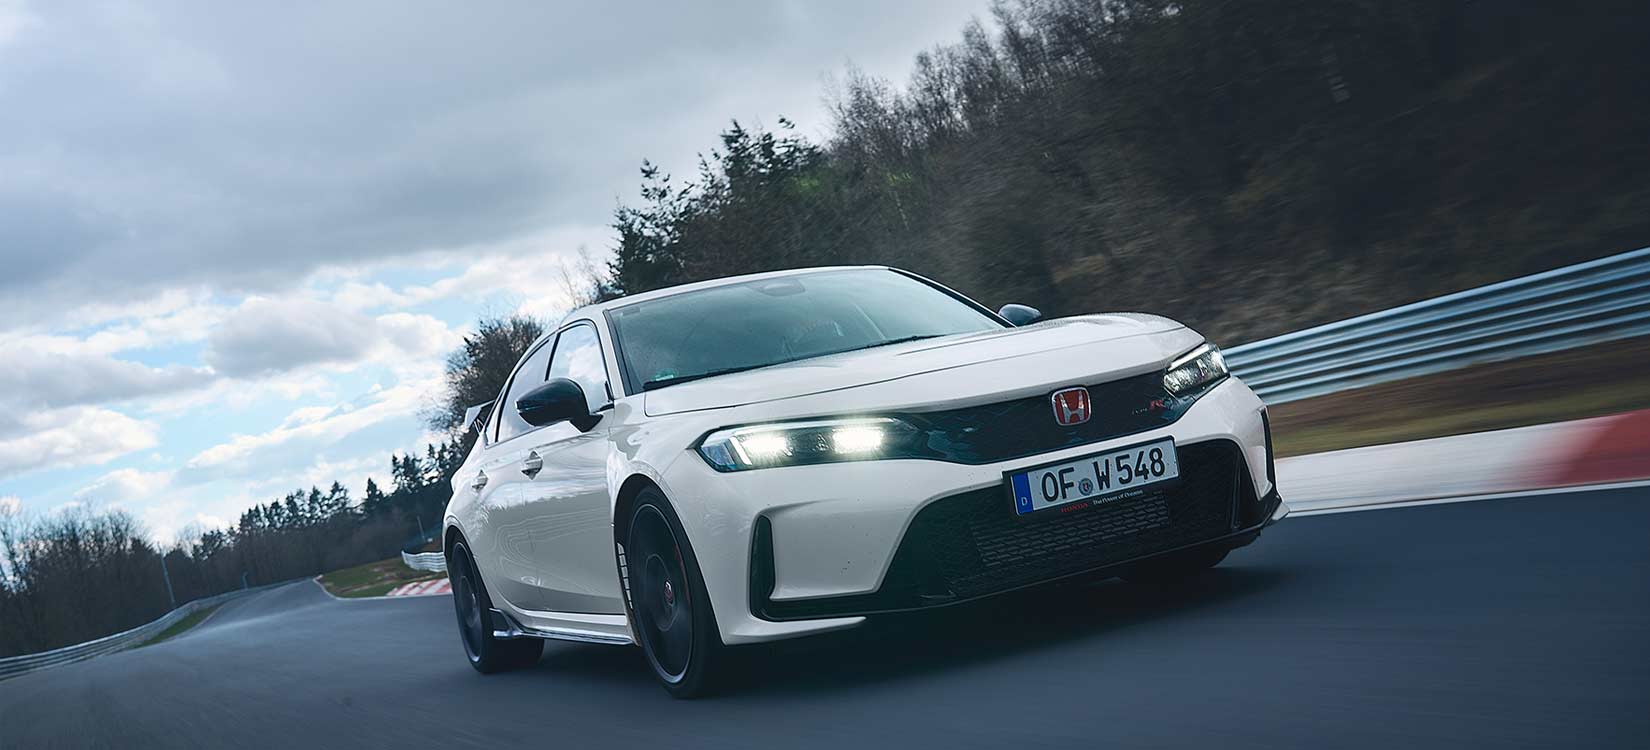 Civic Type R Sets New Front-Wheel Drive Lap Time Record at Nürburgring